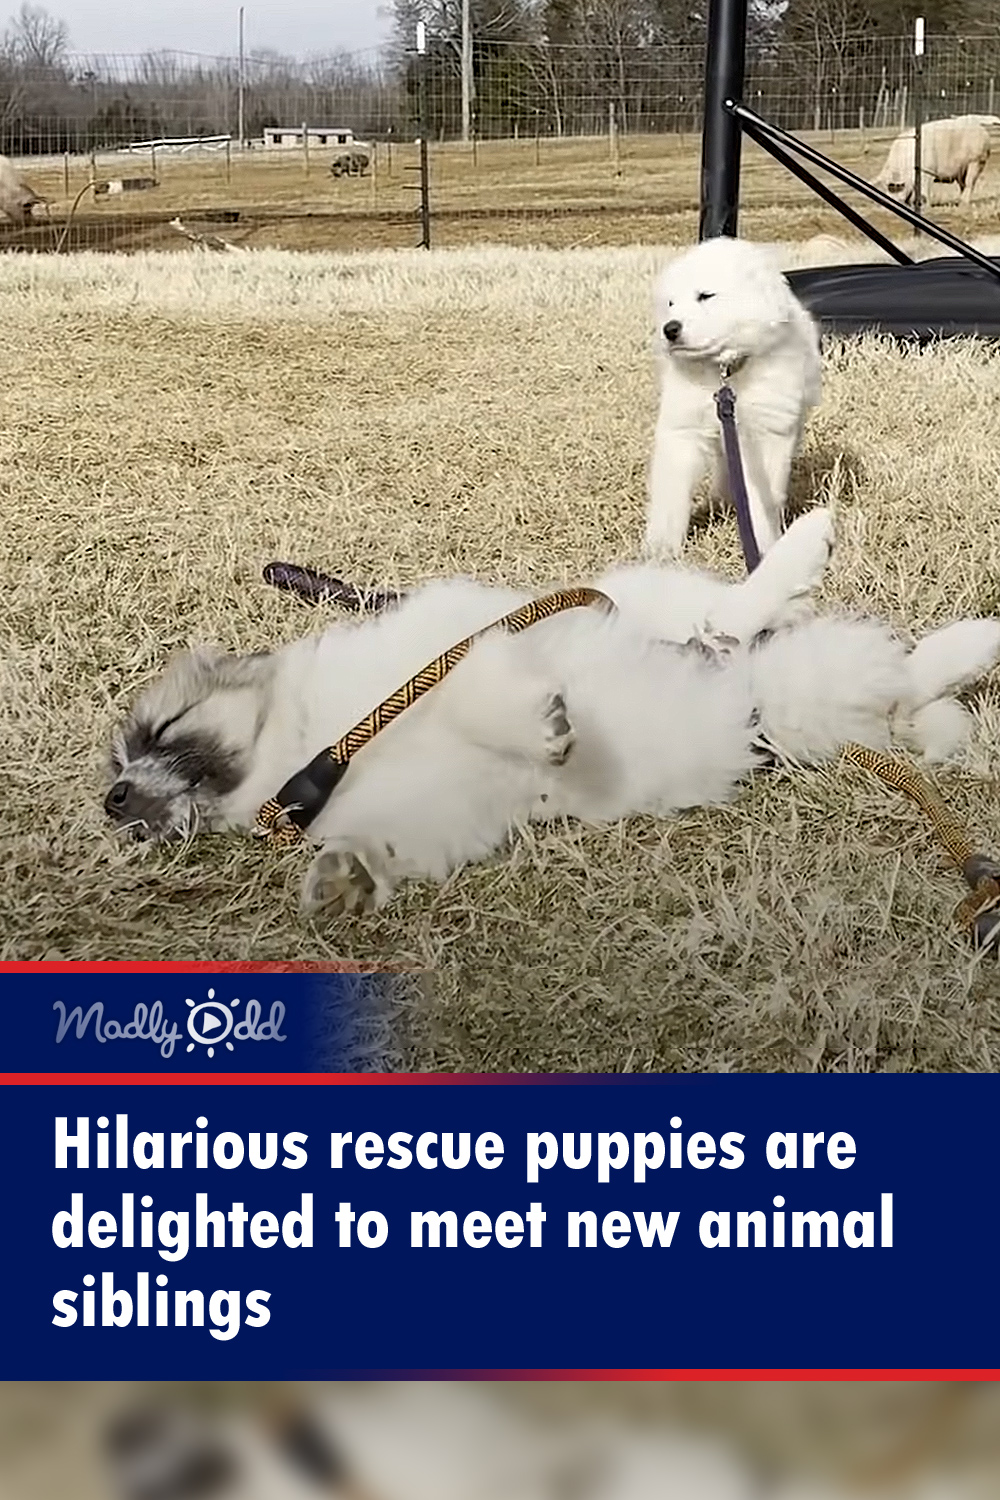 Hilarious rescue puppies are delighted to meet new animal siblings